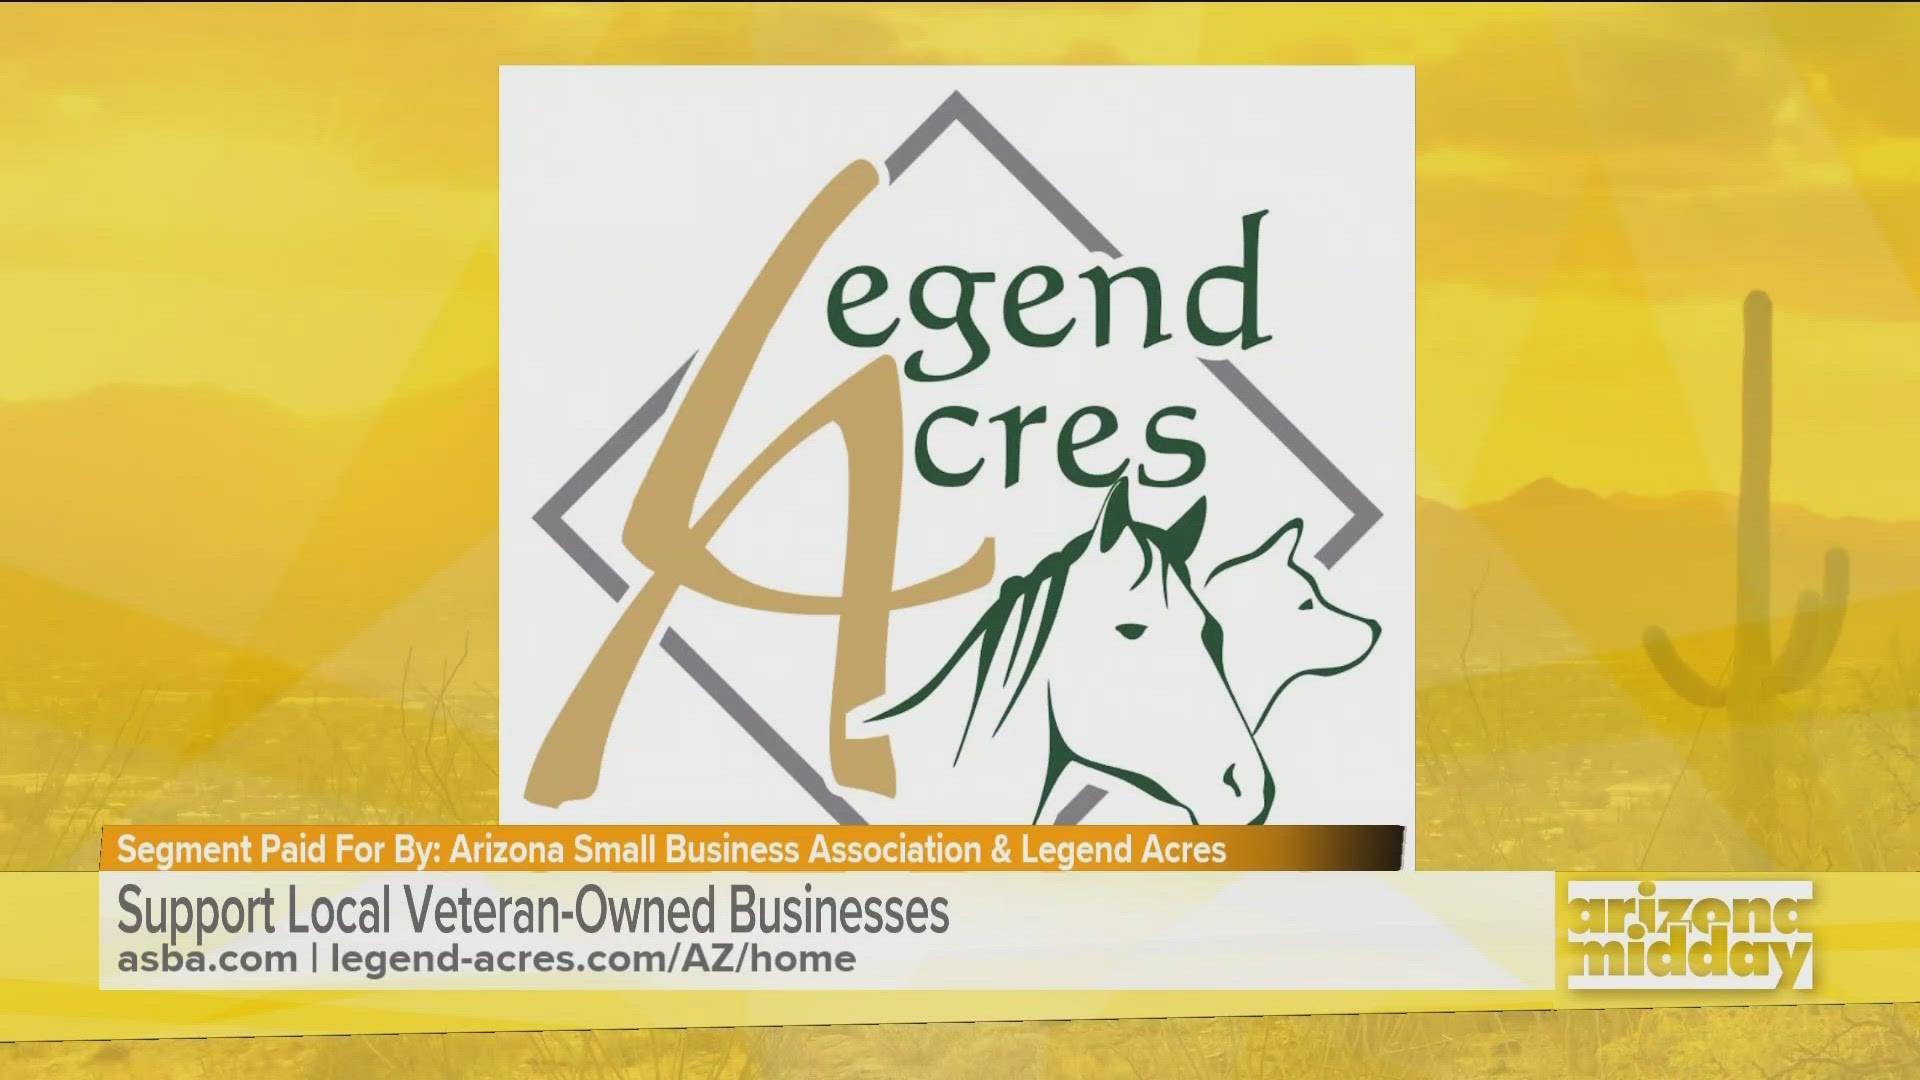 Ryan Dixon with the Arizona Small Business Association shares how they are honoring veterans like Legend Acres founder Kristi may this Military Appreciation Month.